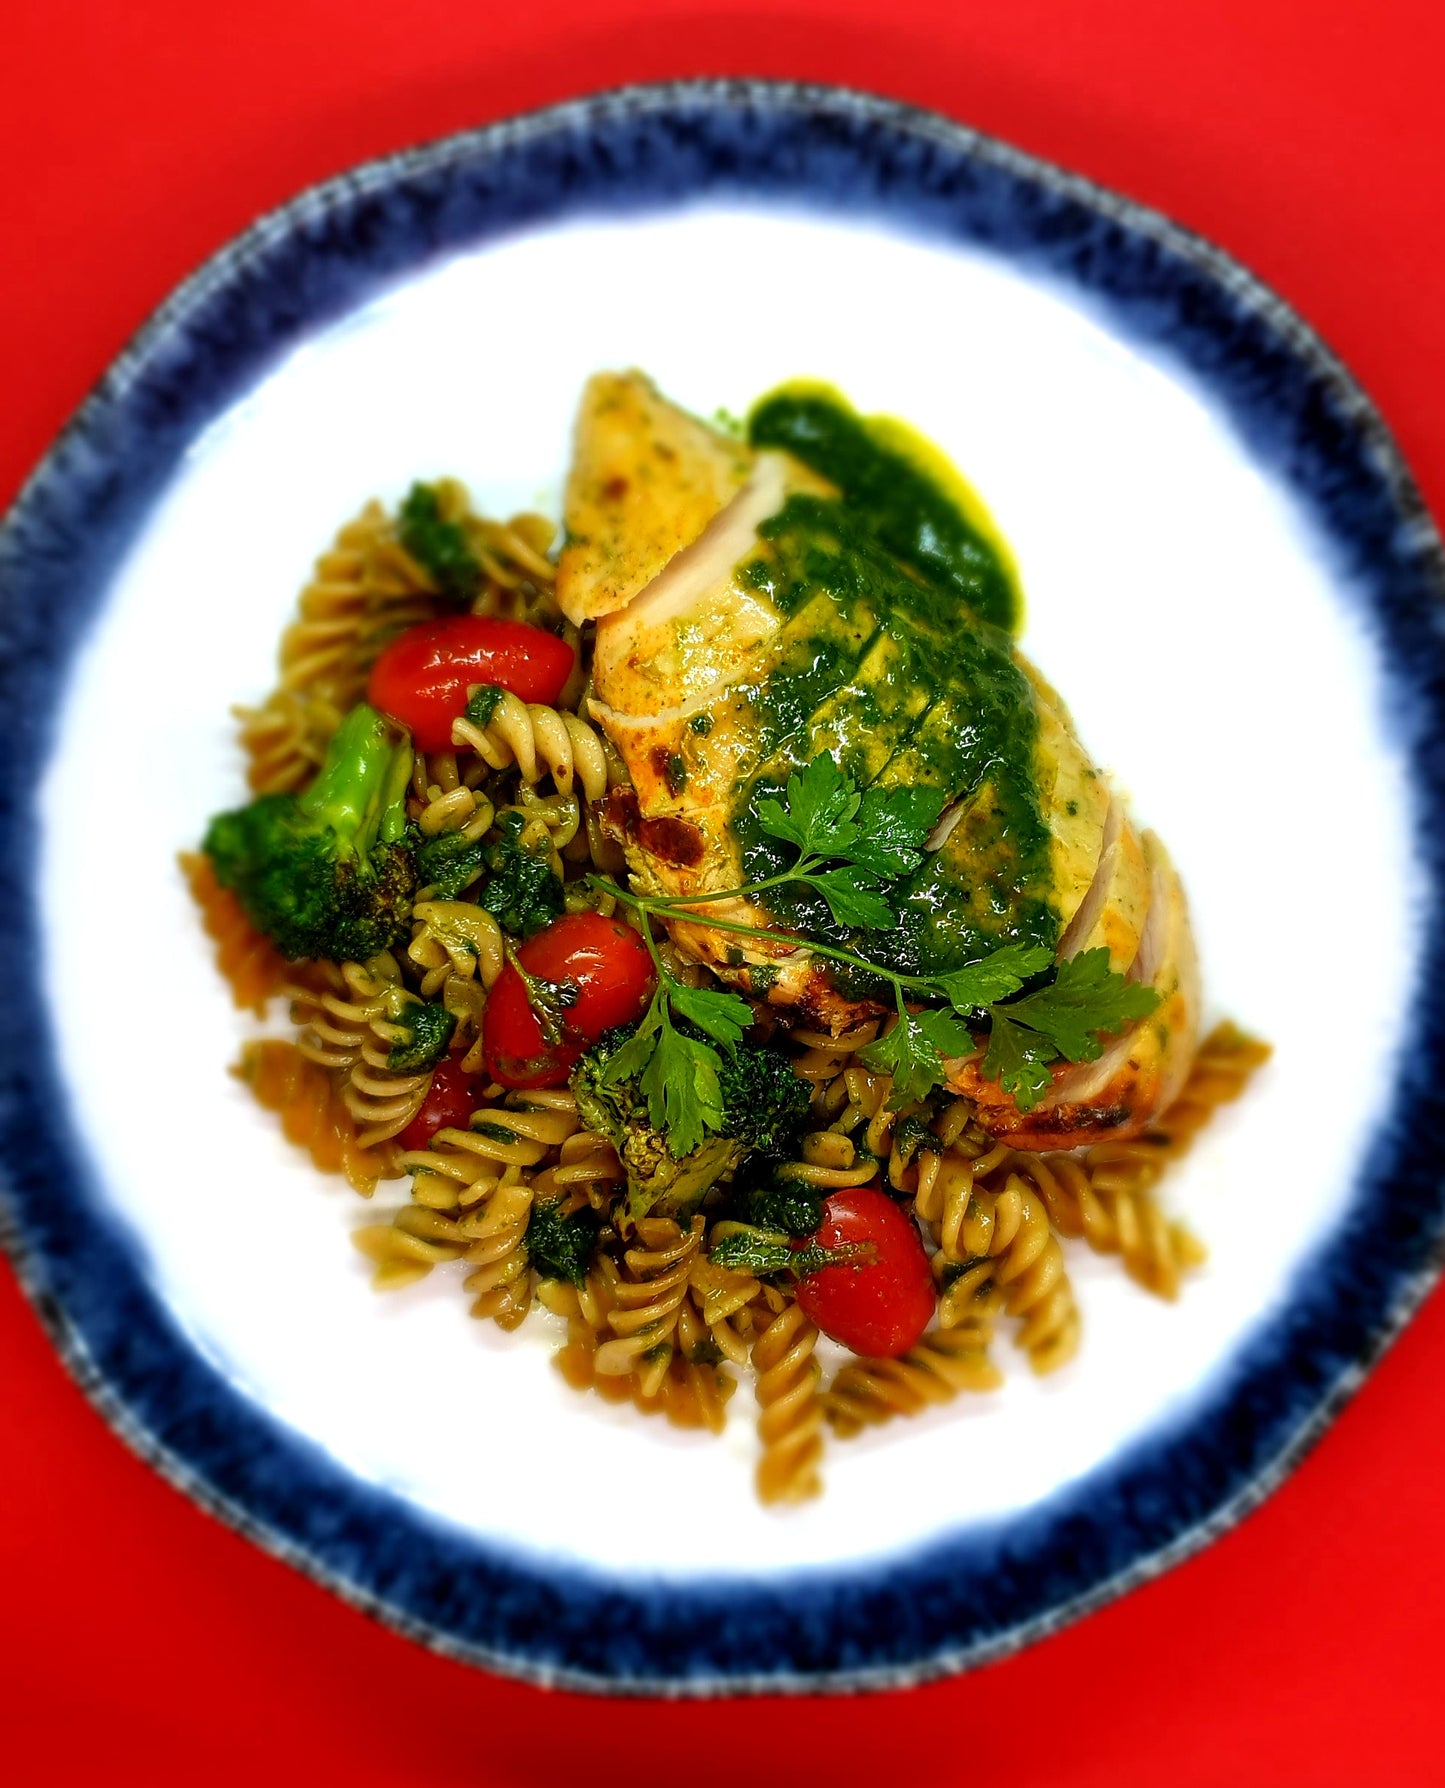 Chicken pesto with whole meal pasta(S)